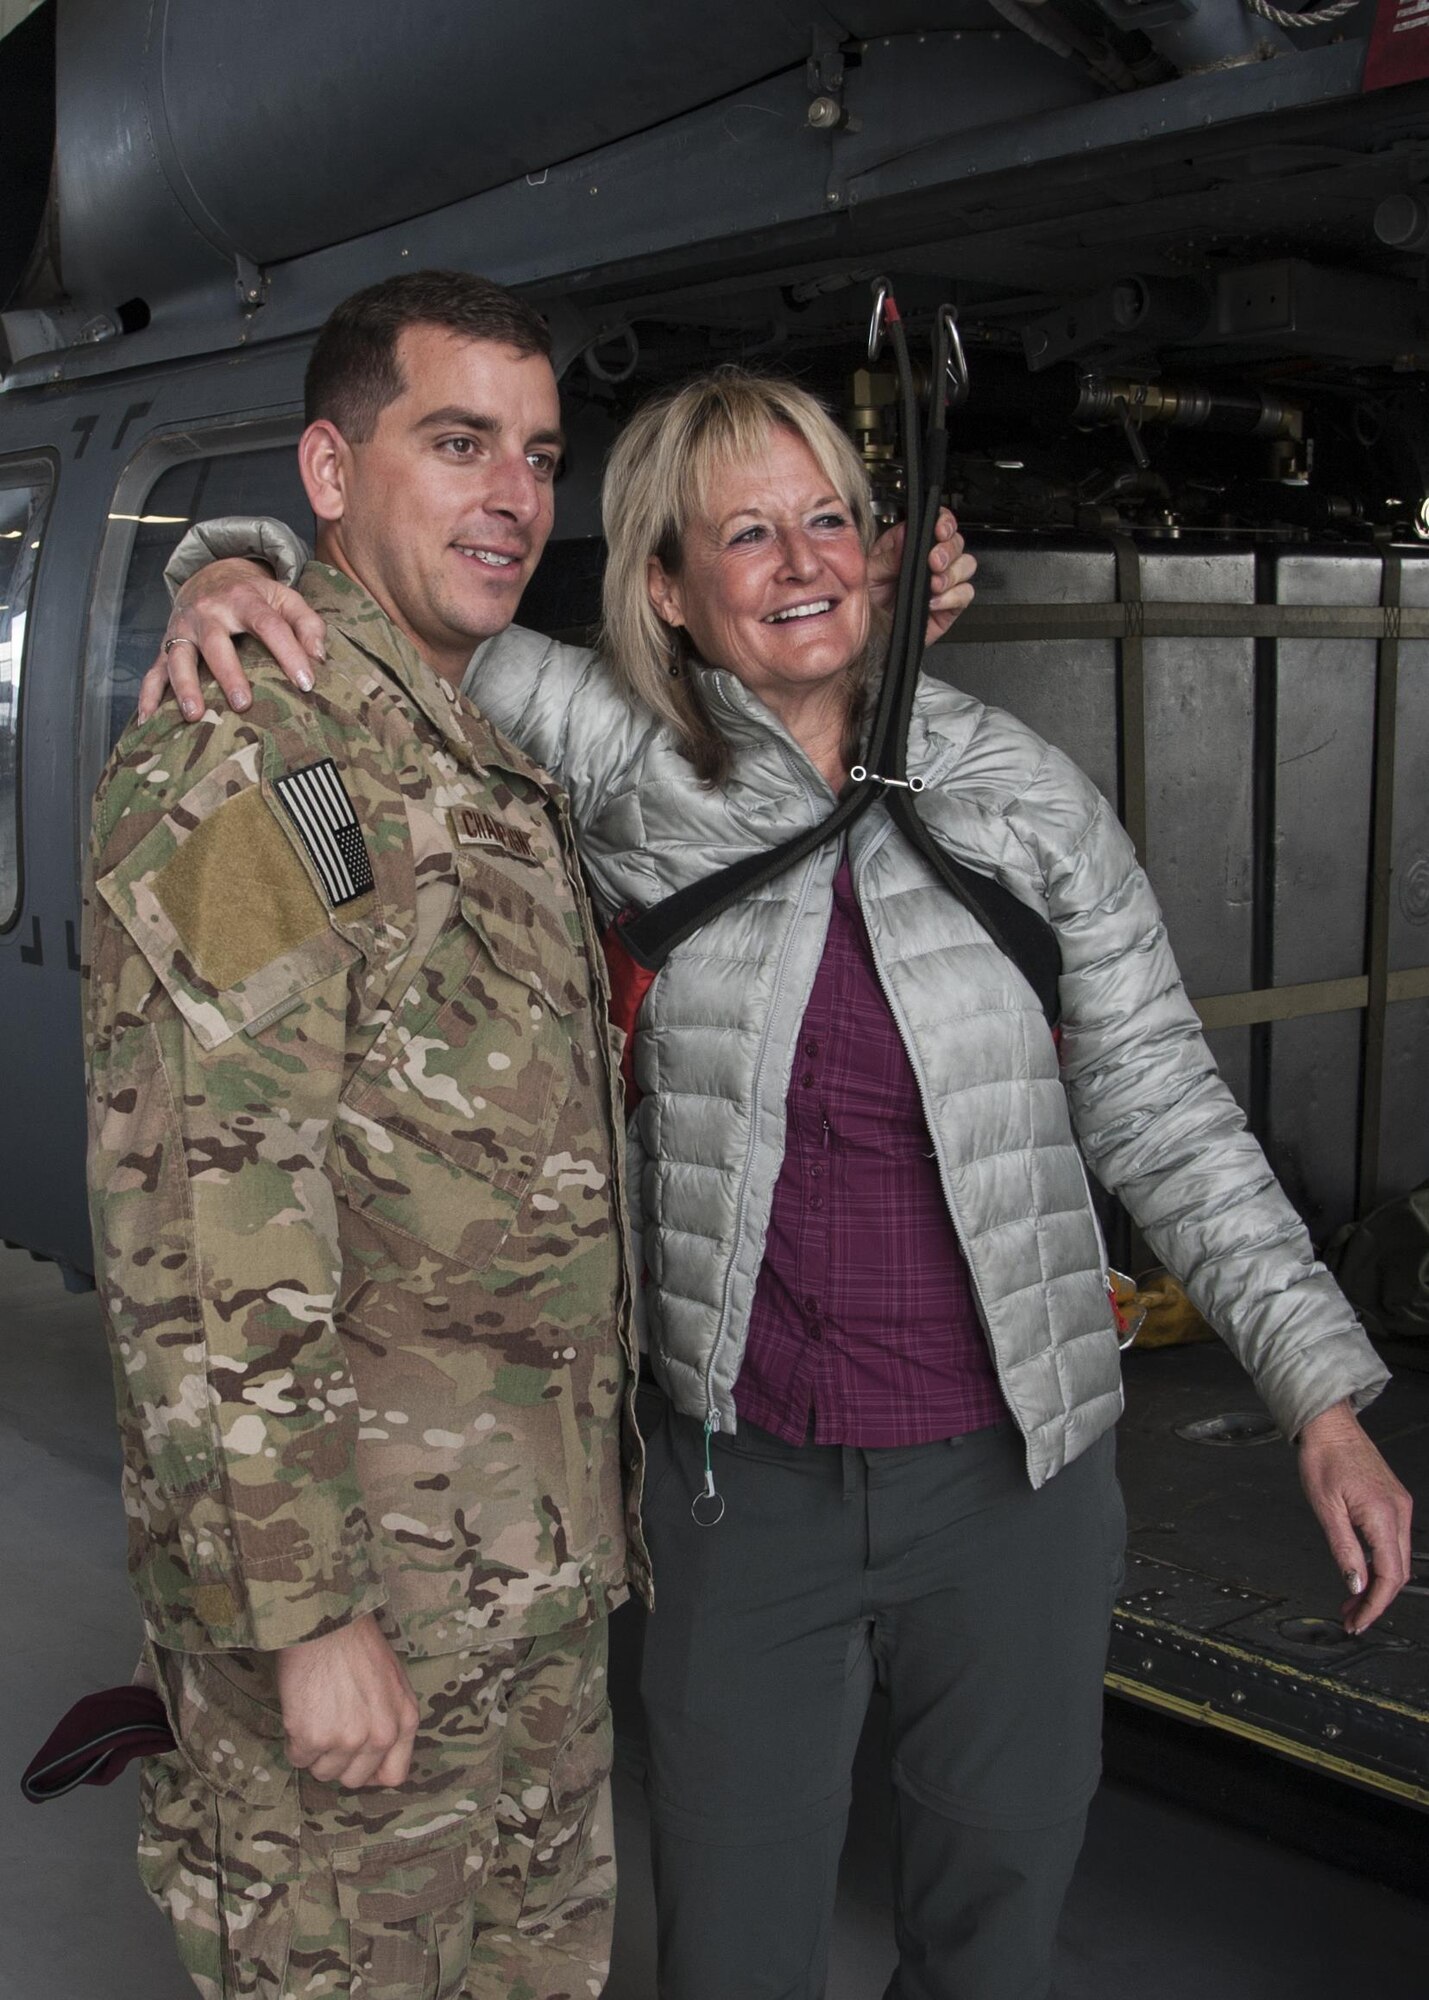 Ronda Ramsier poses with Tech Sgt. Matthew Champagne, U.S. Air Force Pararescue School instructor, in the harness used to rescue her after she became stranded during an August hike near Durango, Colorado. More than 50 Airmen assisted in the 12 hour search-and-rescue mission. 